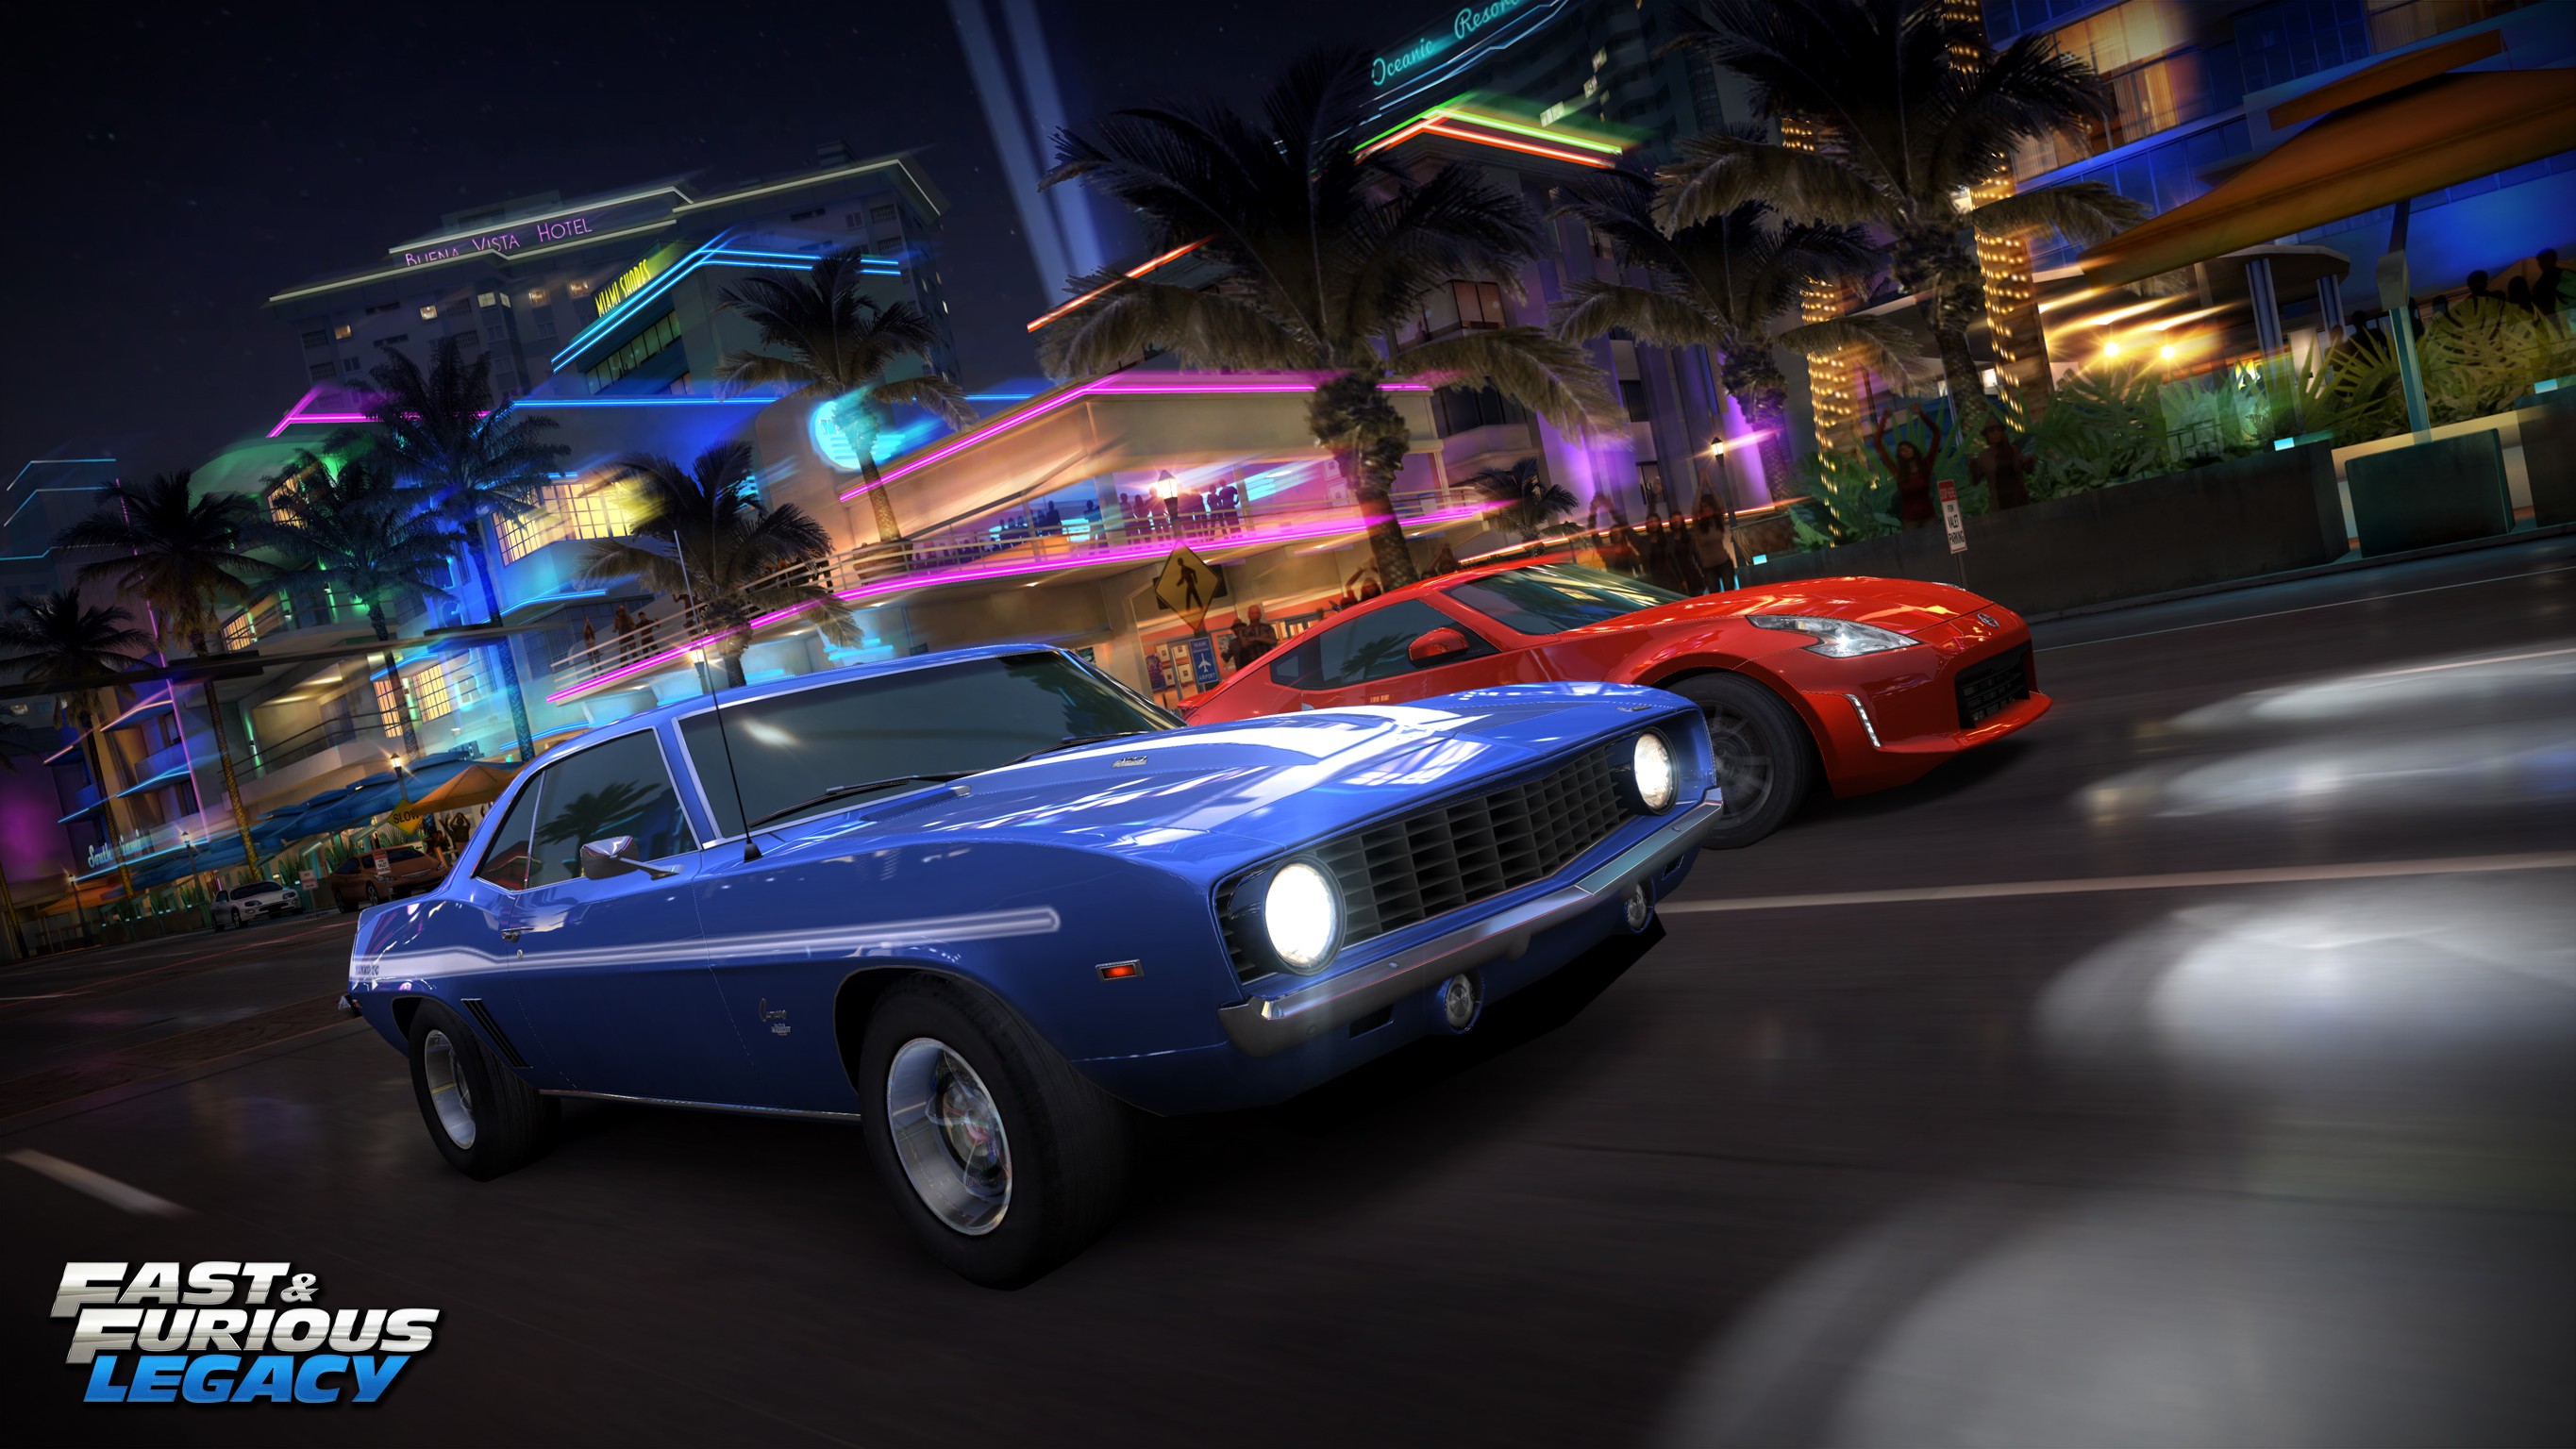 General 2730x1536 video games Fast & Furious: Legacy PC gaming blue cars racing red cars car vehicle city night asphalt